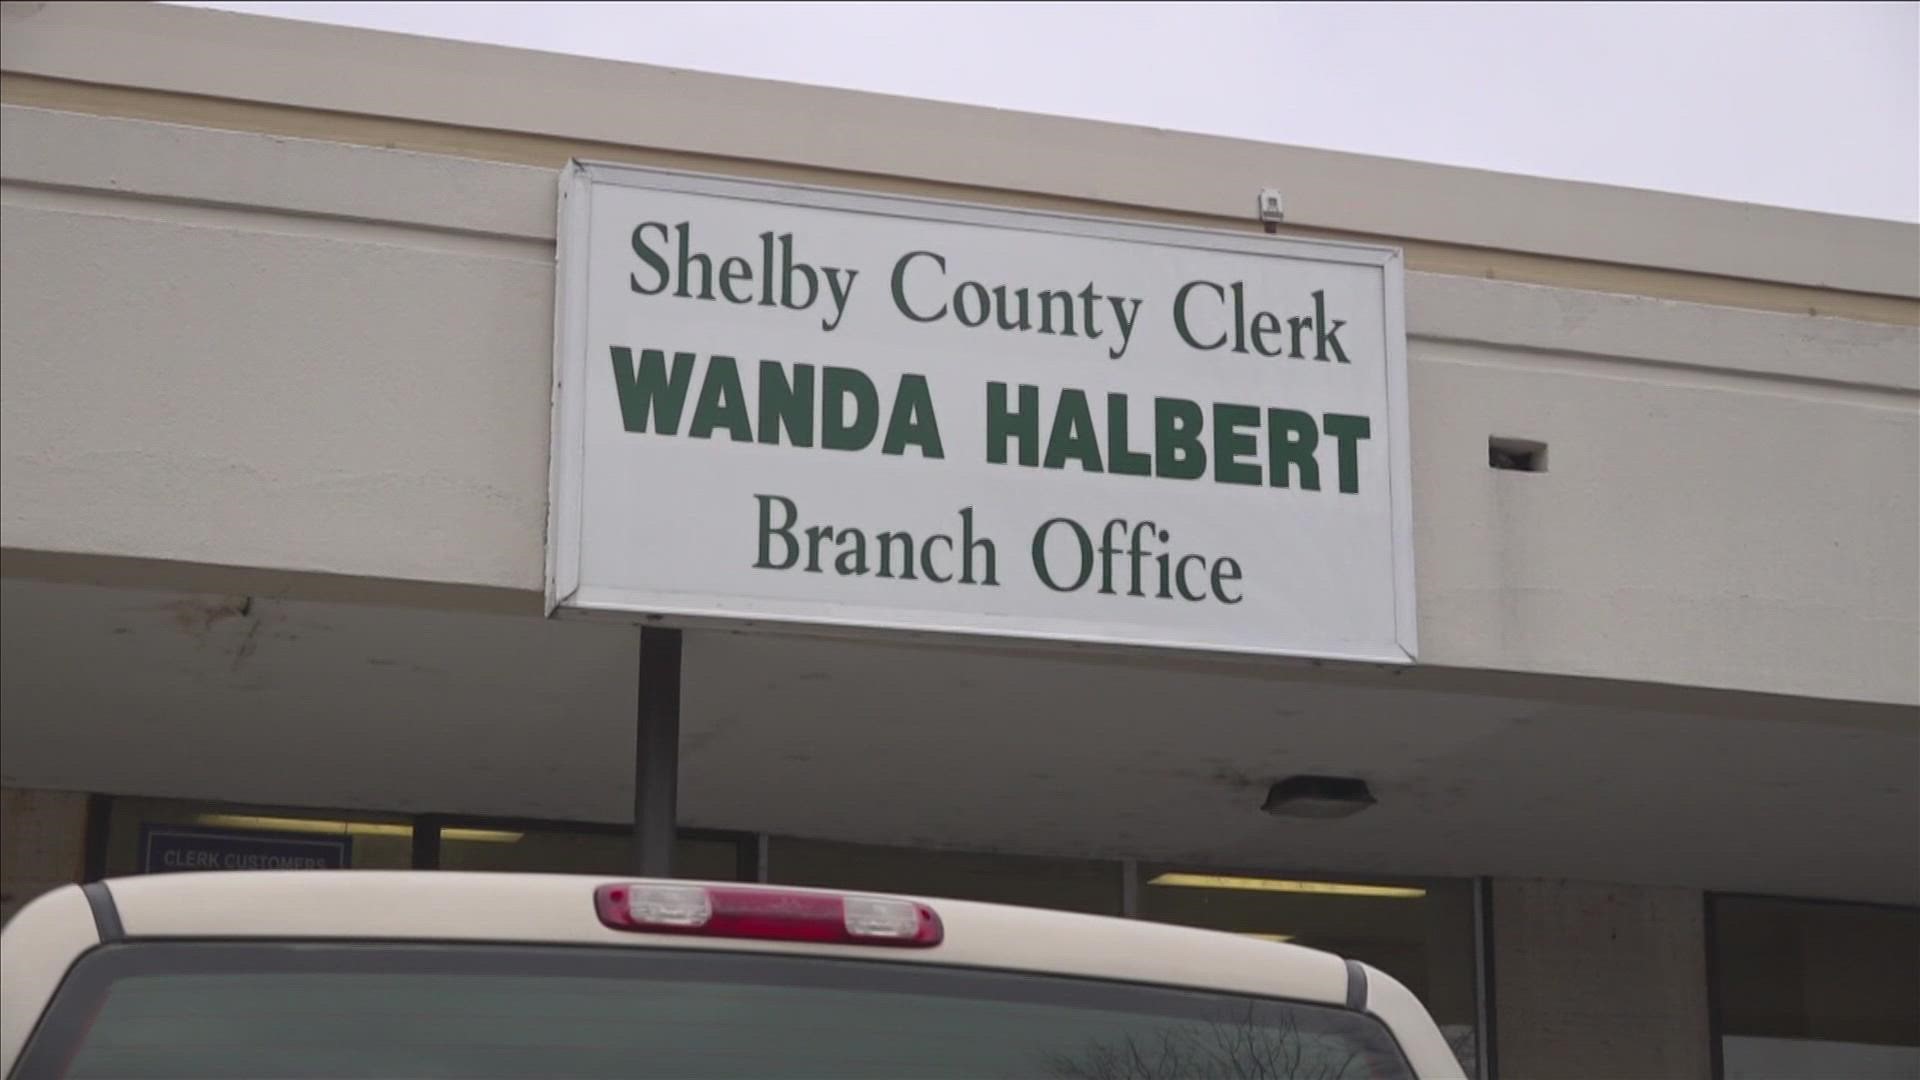 Shelby County Mayor Harris told Wanda Halbert in a letter to make a decision about the location of an office to replace the Poplar Plaza Shopping Center location.